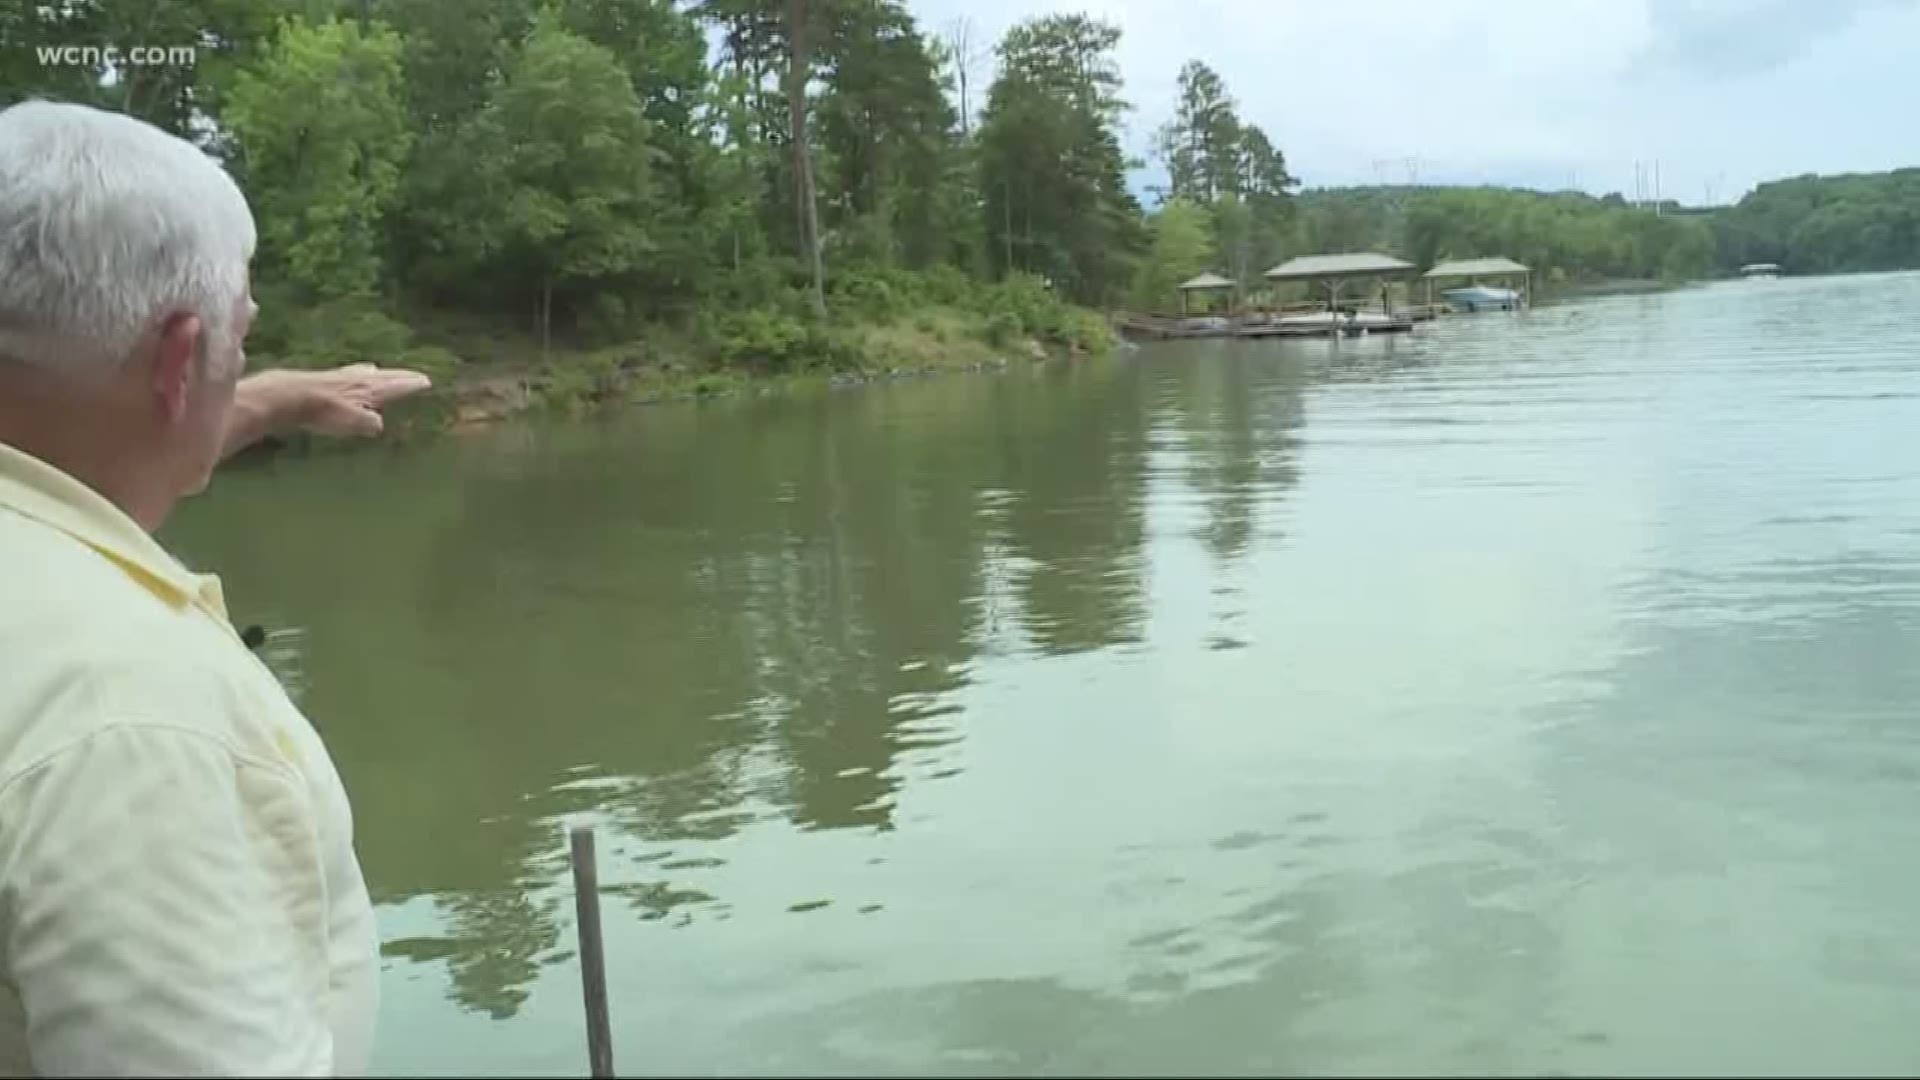 Several docks and other large debris are still in the Catawba River system after they were dislodged during the floods. Boaters are being warned to watch out.